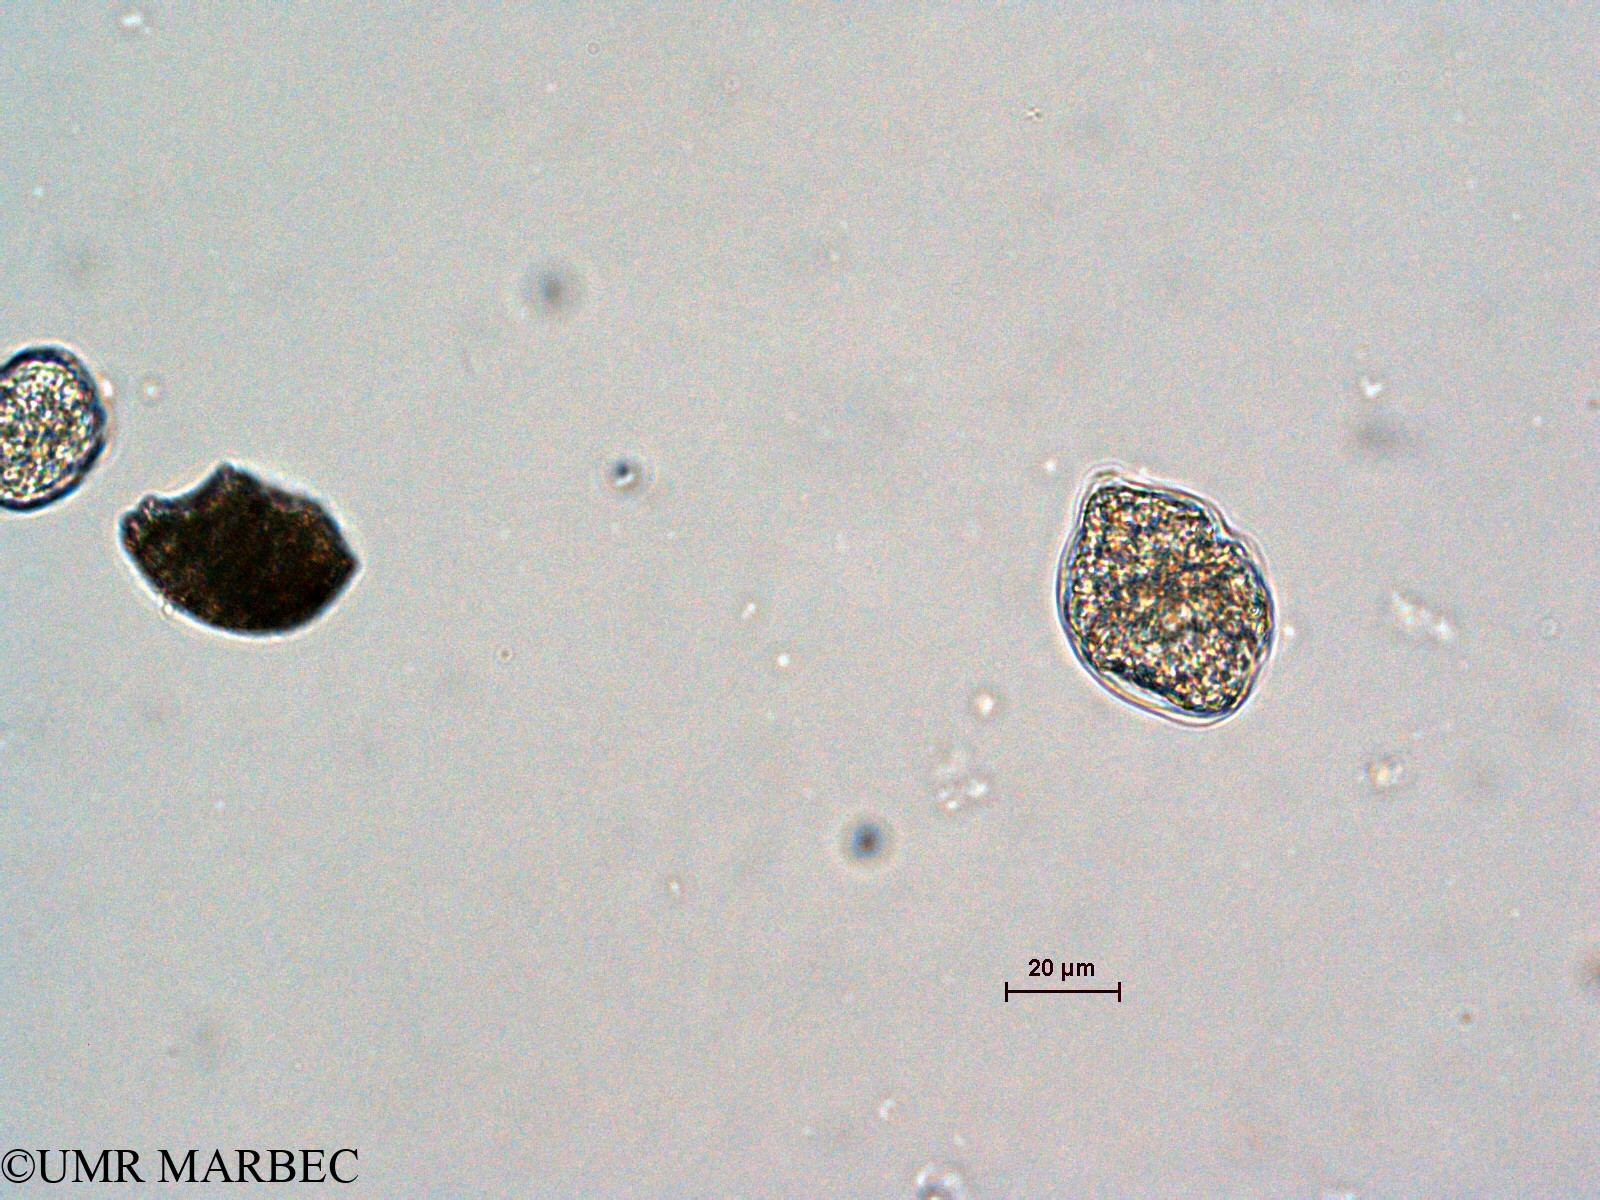 phyto/Scattered_Islands/all/COMMA April 2011/Gyrodinium sp2 (ancien Gyrodinium sp1 -3)(copy).jpg